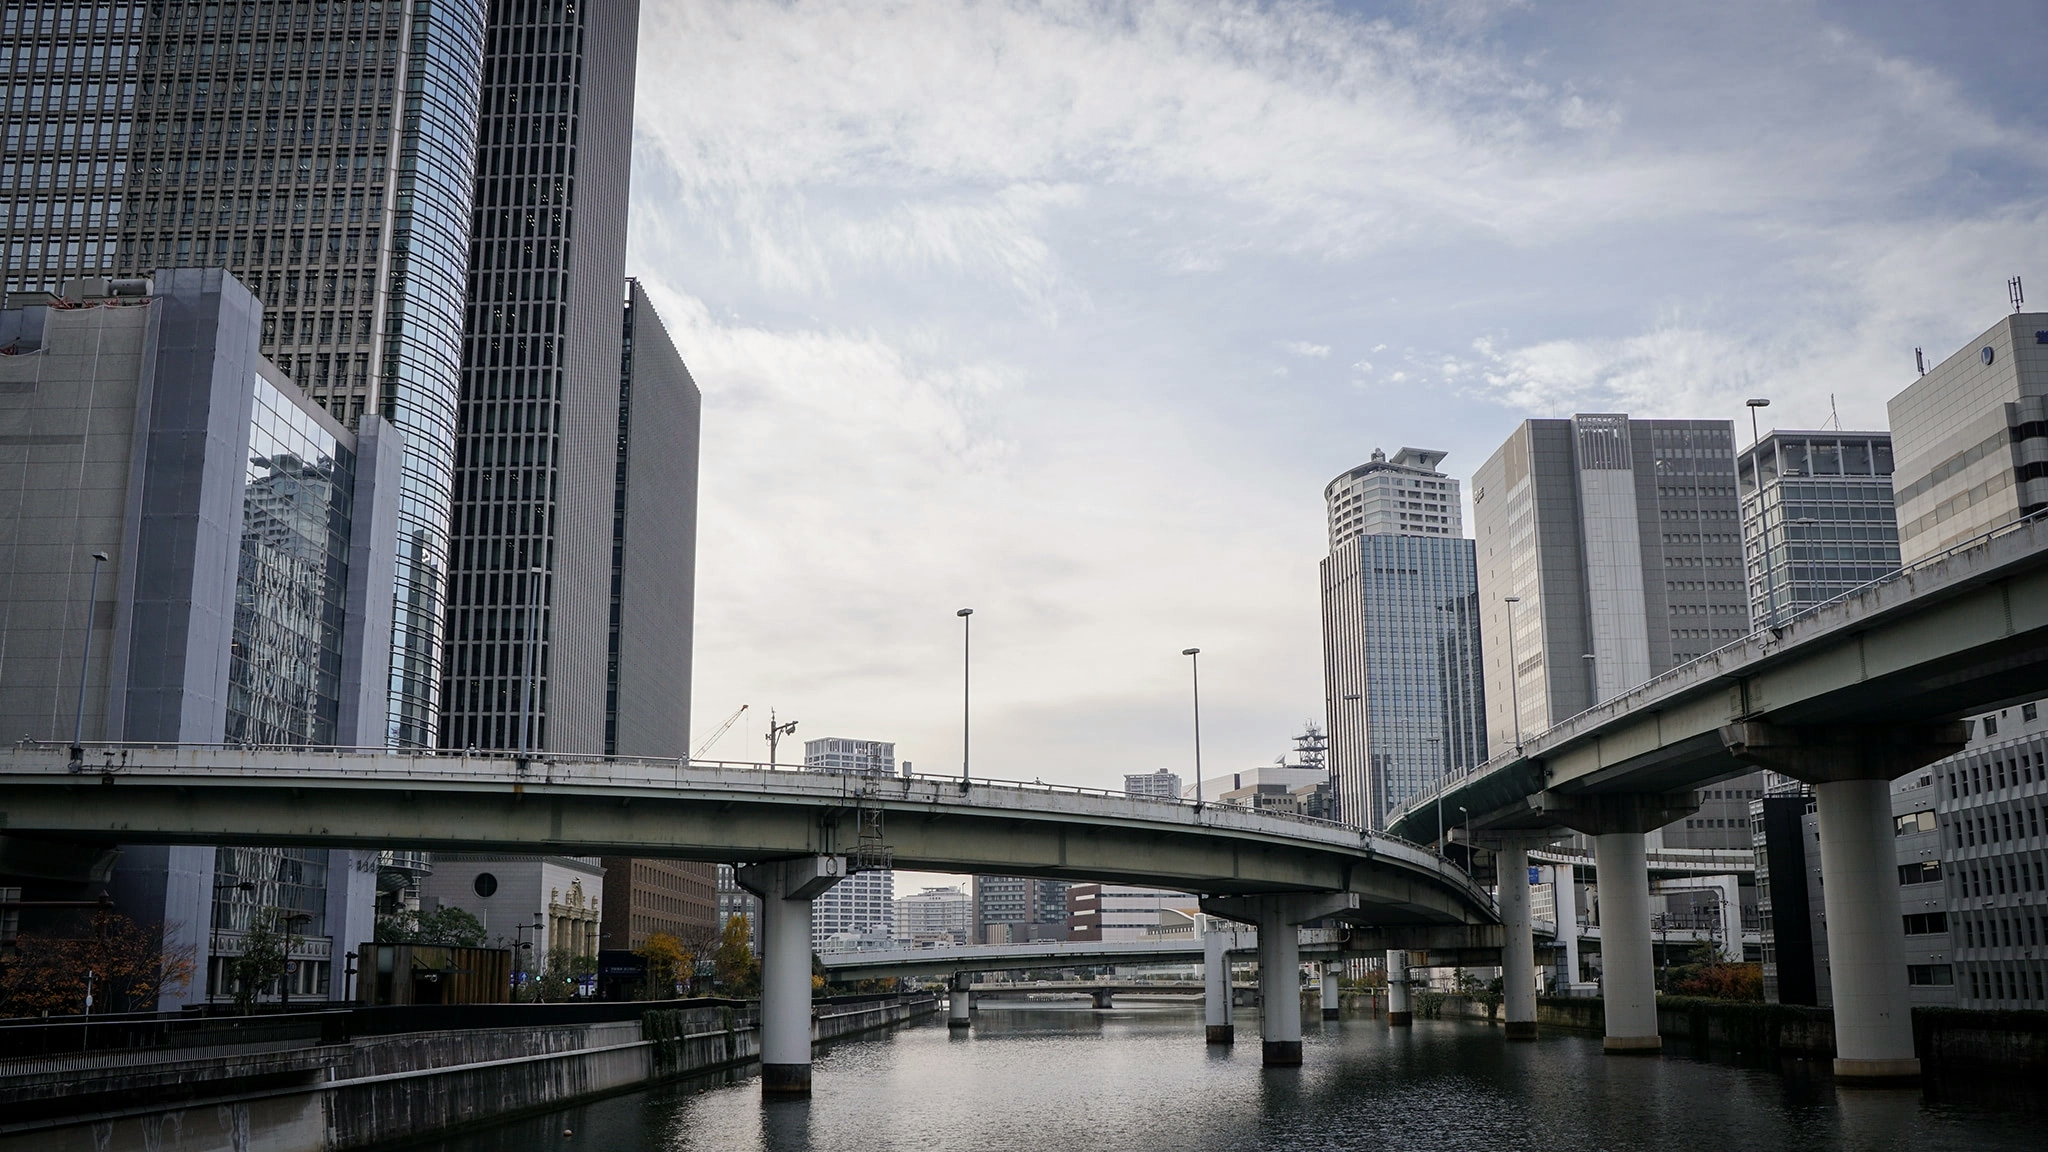 High rise buildings and a network of bridges typical of the cityscape of Osaka are set against a cloudy, blue winter's sky